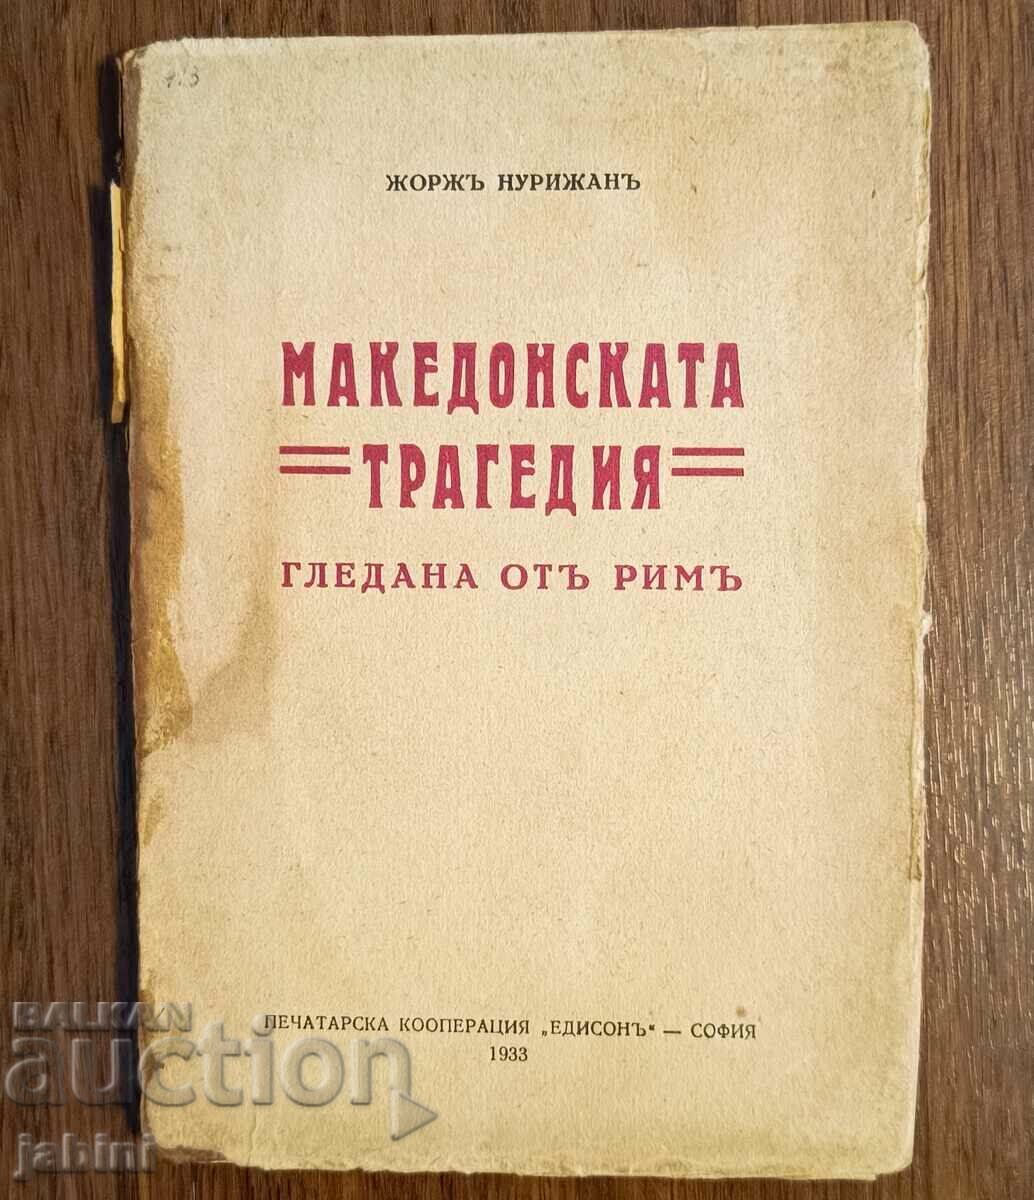 Book The Macedonian Tragedy by Georges Nurijan 1933